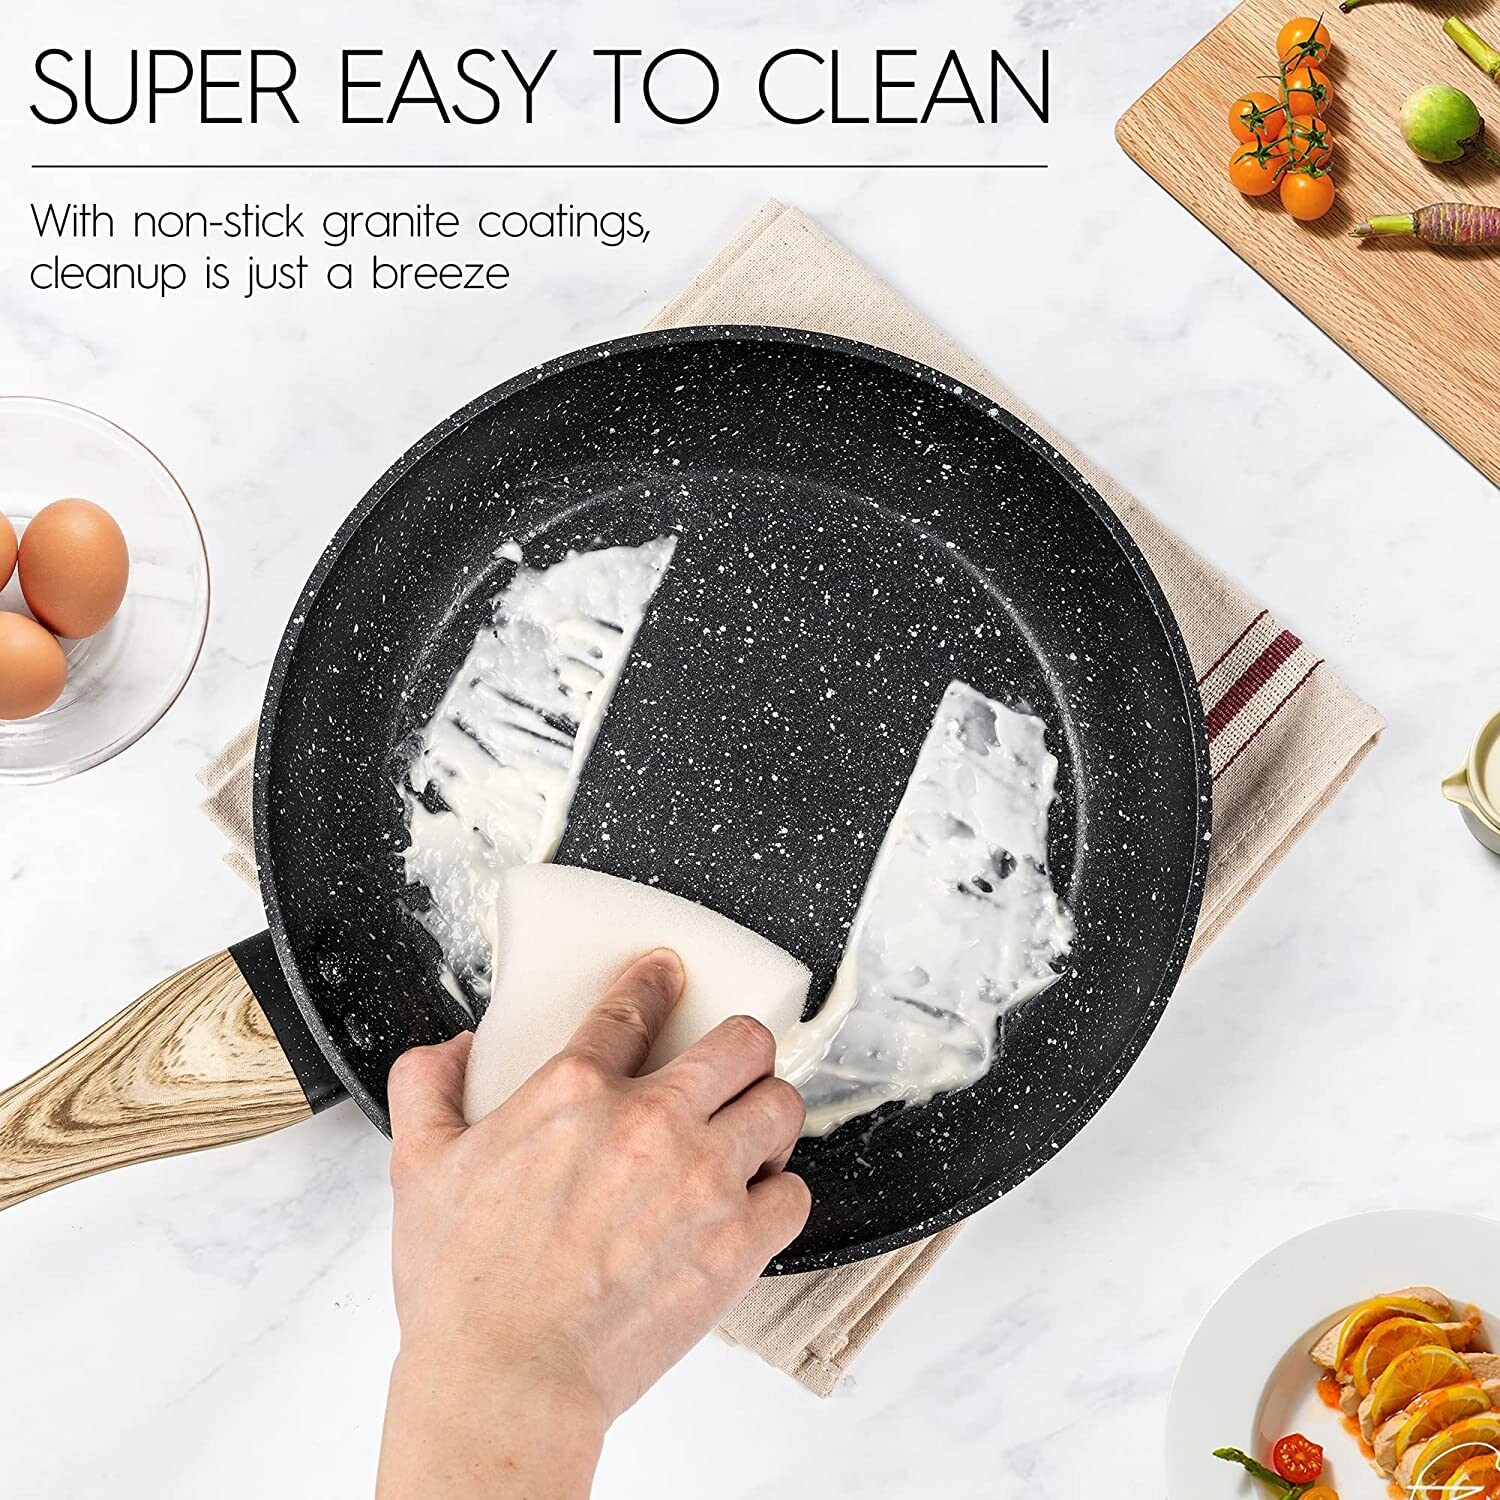 https://ak1.ostkcdn.com/images/products/is/images/direct/cb6dd412159326c7954186f5703491b967add537/White-Pots-and-Pans-Set-Nonstick-Cookware-Sets%2C-12pcs-White-Granite-Cookware-Set-Induction-Compatible.jpg